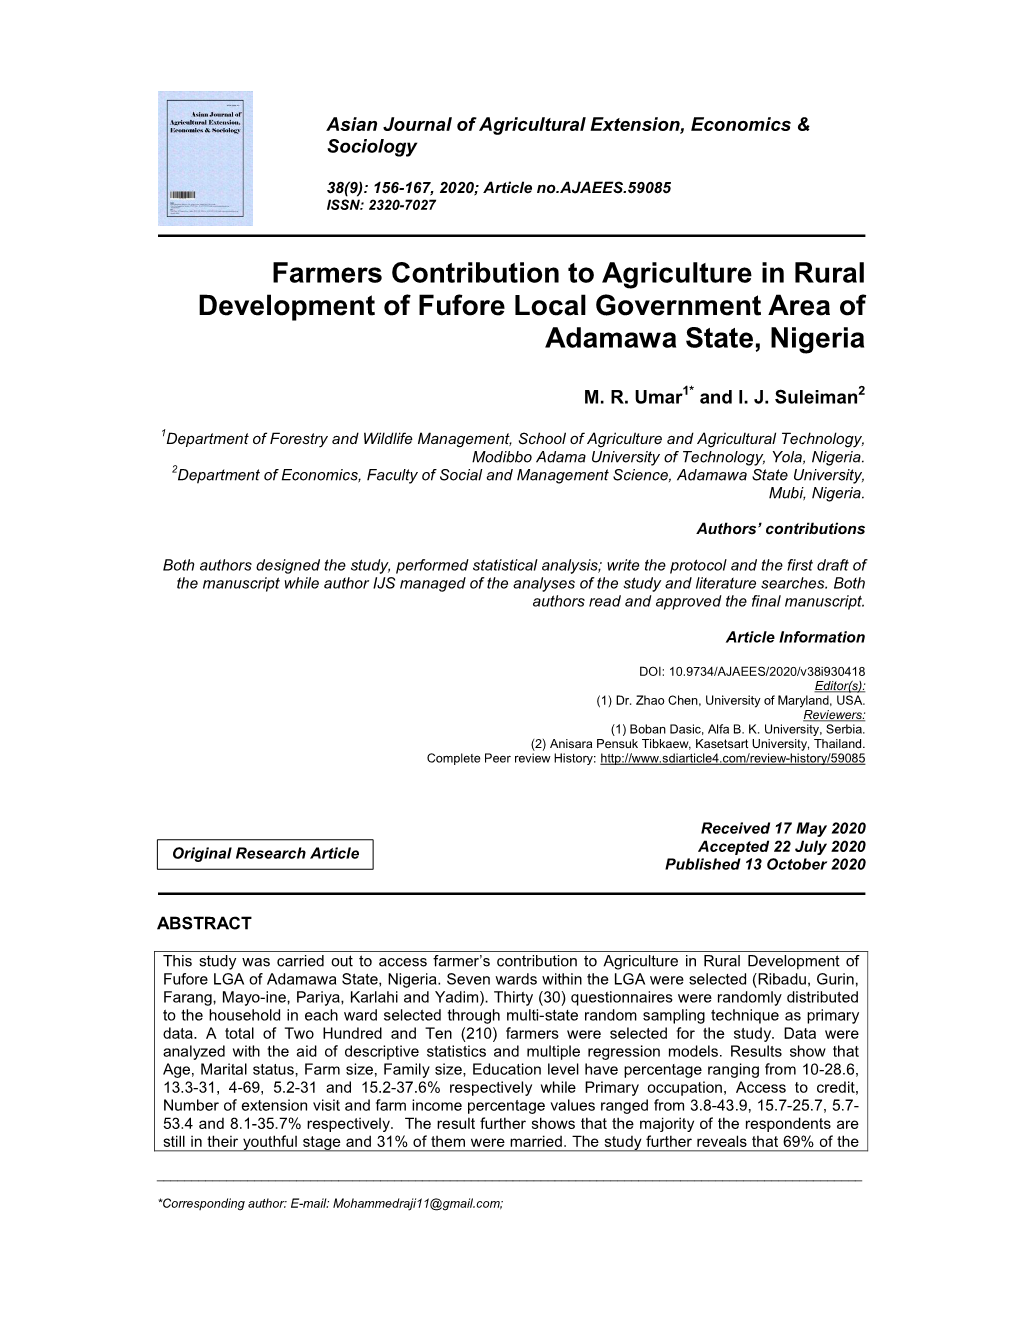 Farmers Contribution to Agriculture in Rural Development of Fufore Local Government Area of Adamawa State, Nigeria